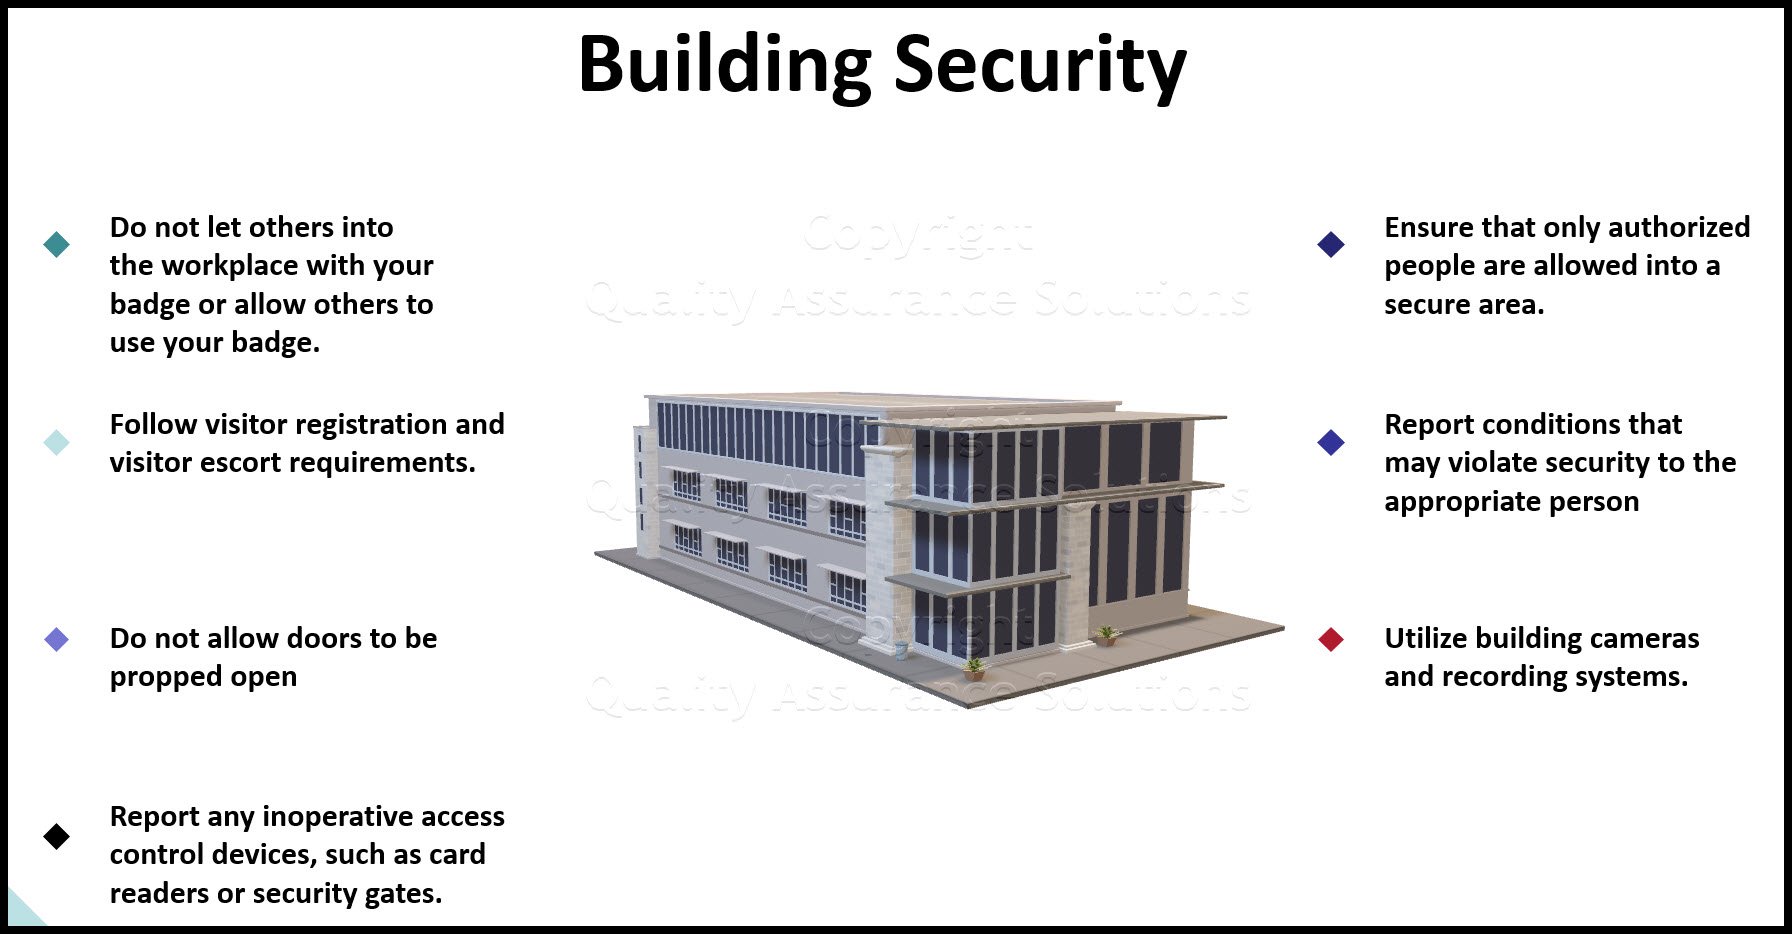 Review this building security checklist for a list of do's and don'ts. Use this article to teach your employees about building security and social engineering threats.